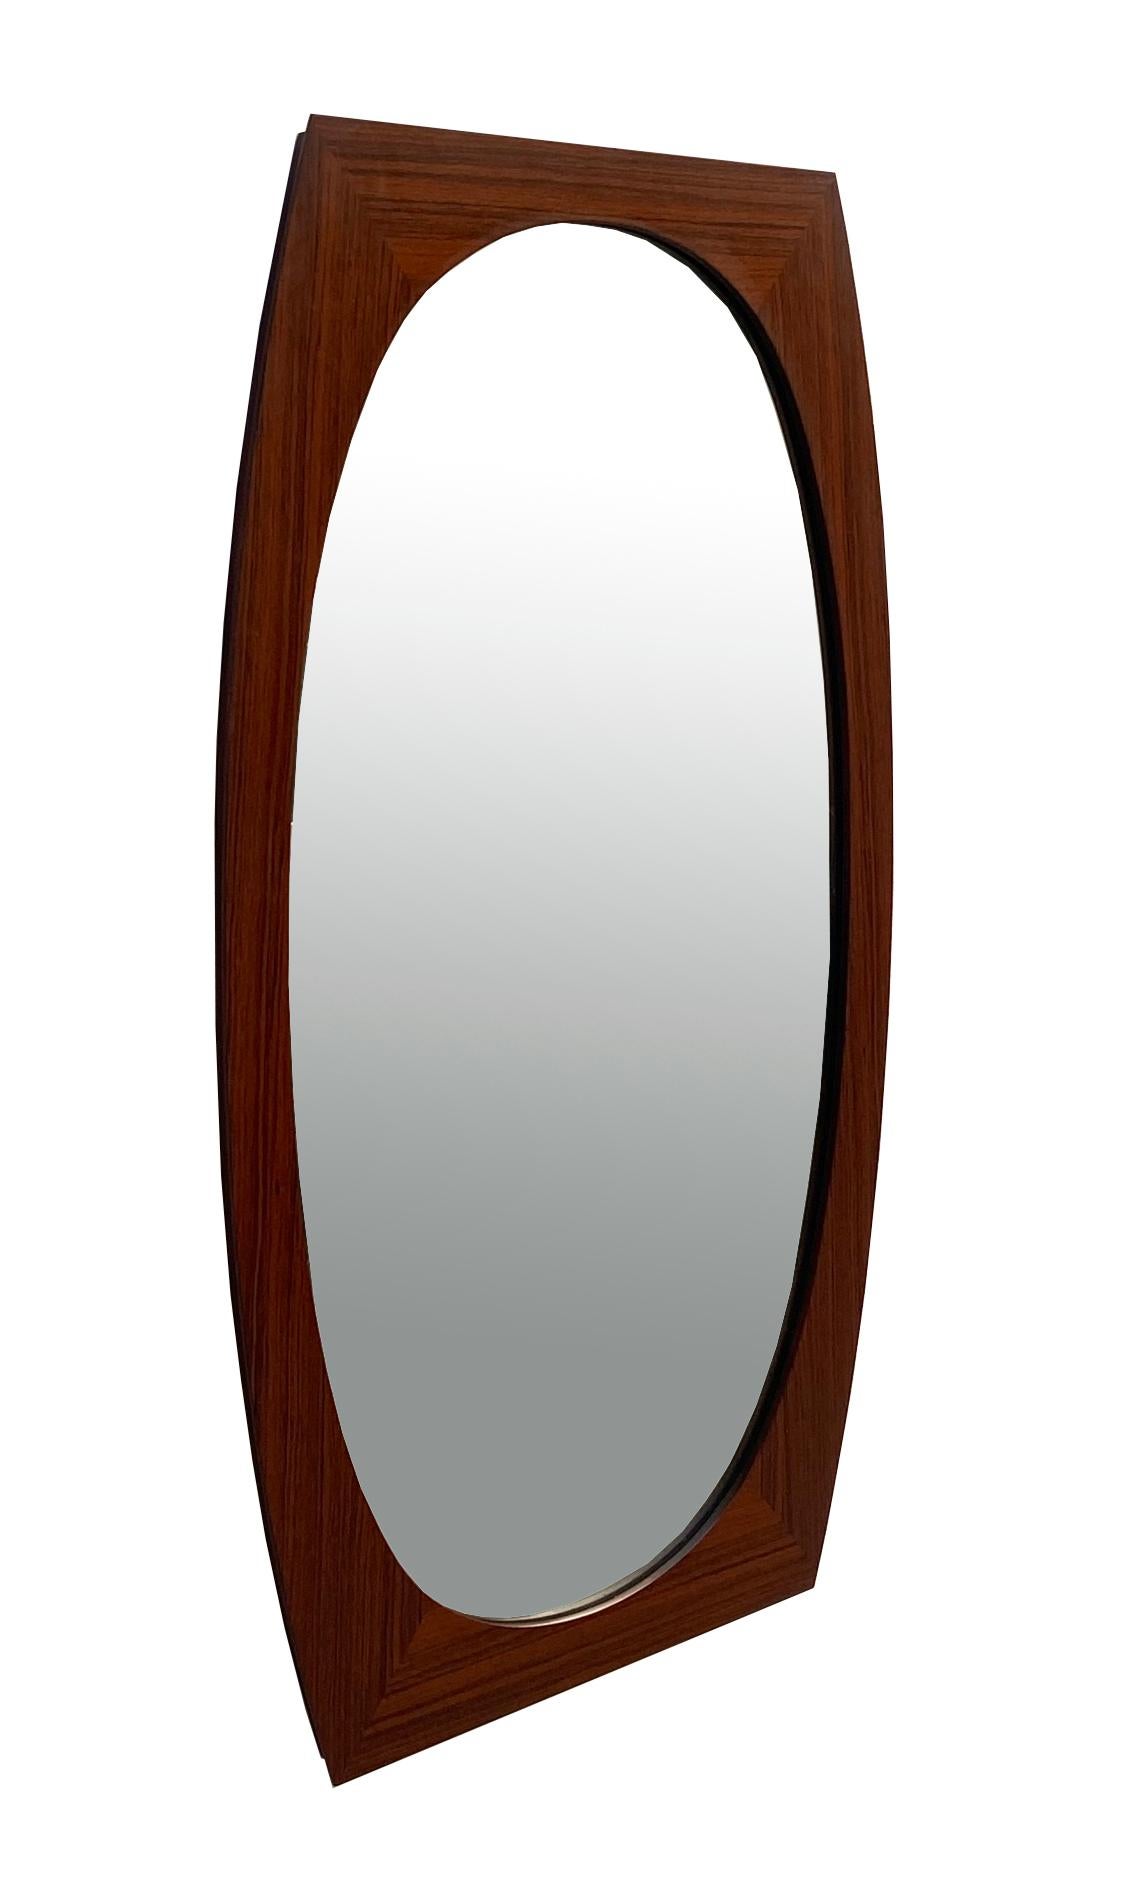 A good sized Scandinavian wood elliptical mirror, circa 1960. Nicely framed with a curved solid wood frame.